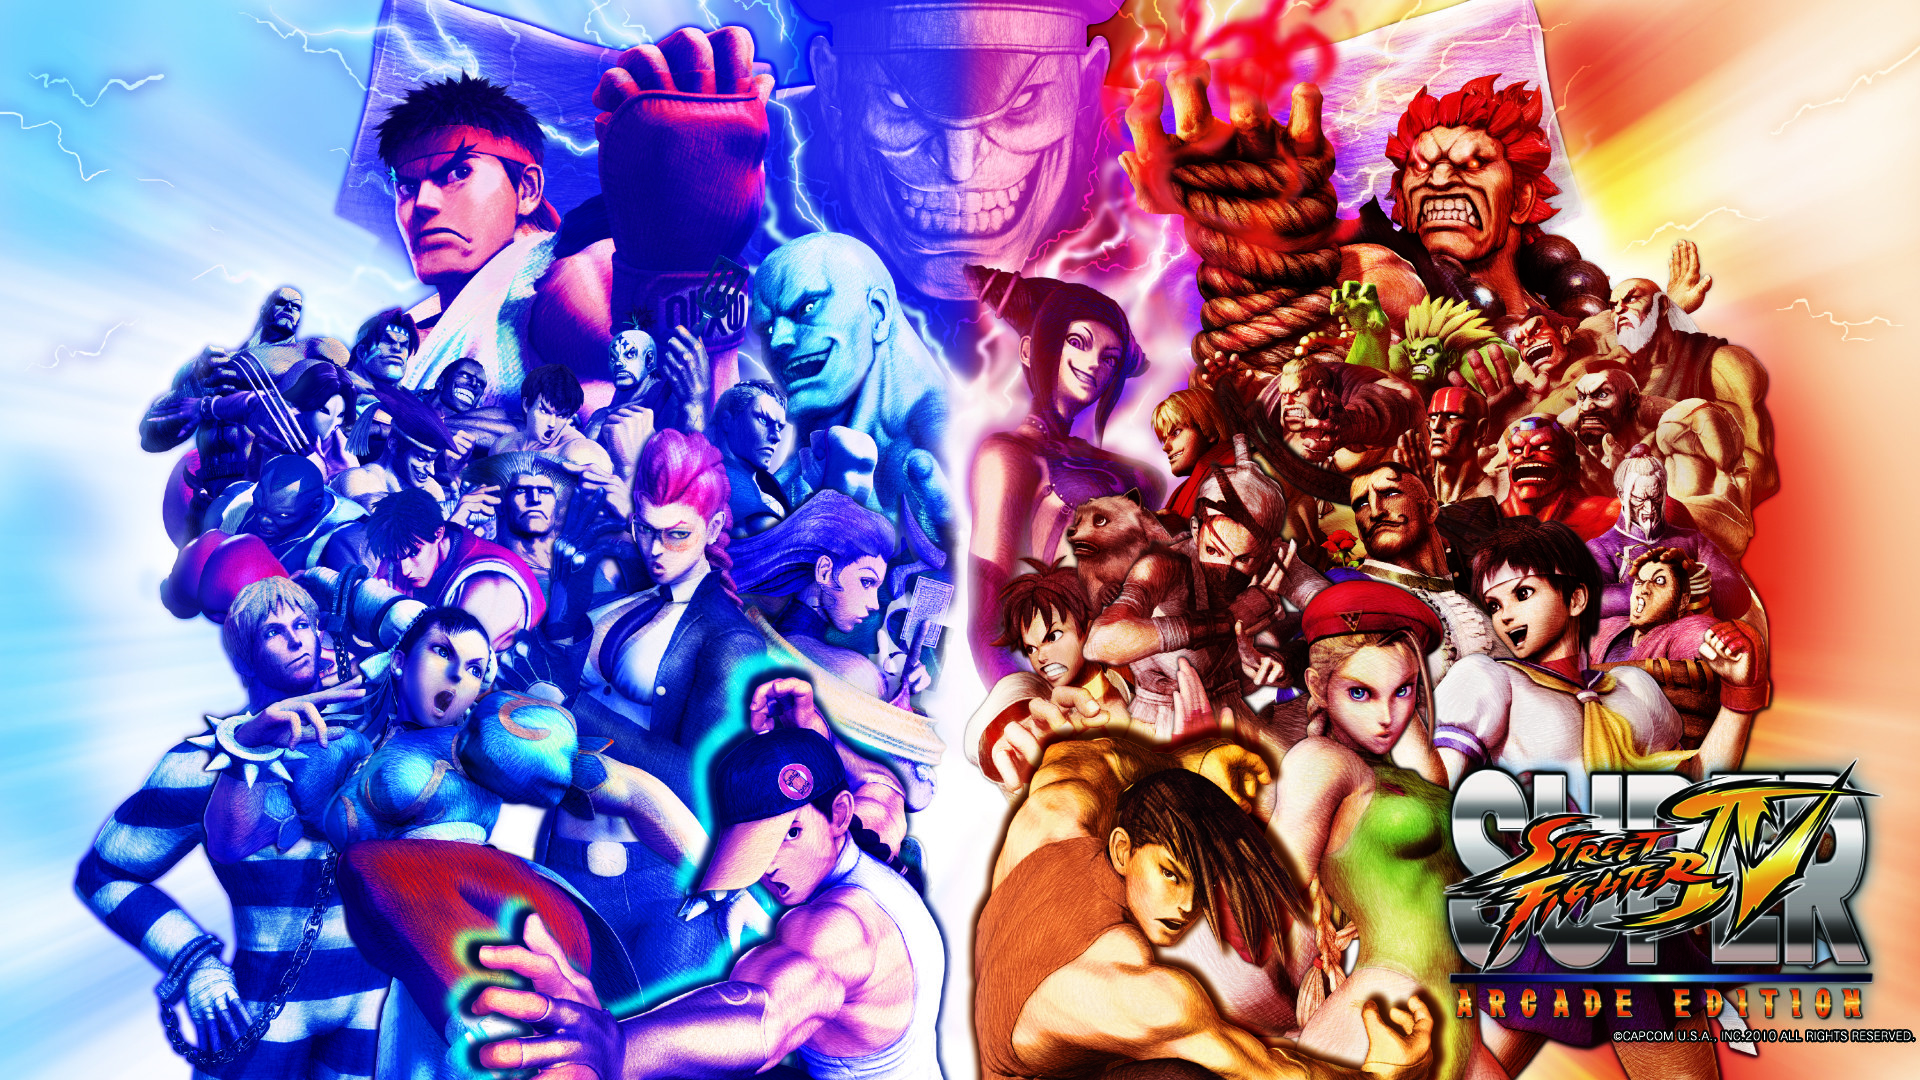 1920x1080 Super Street Fighter IV Arcade Edition: Wallpapers